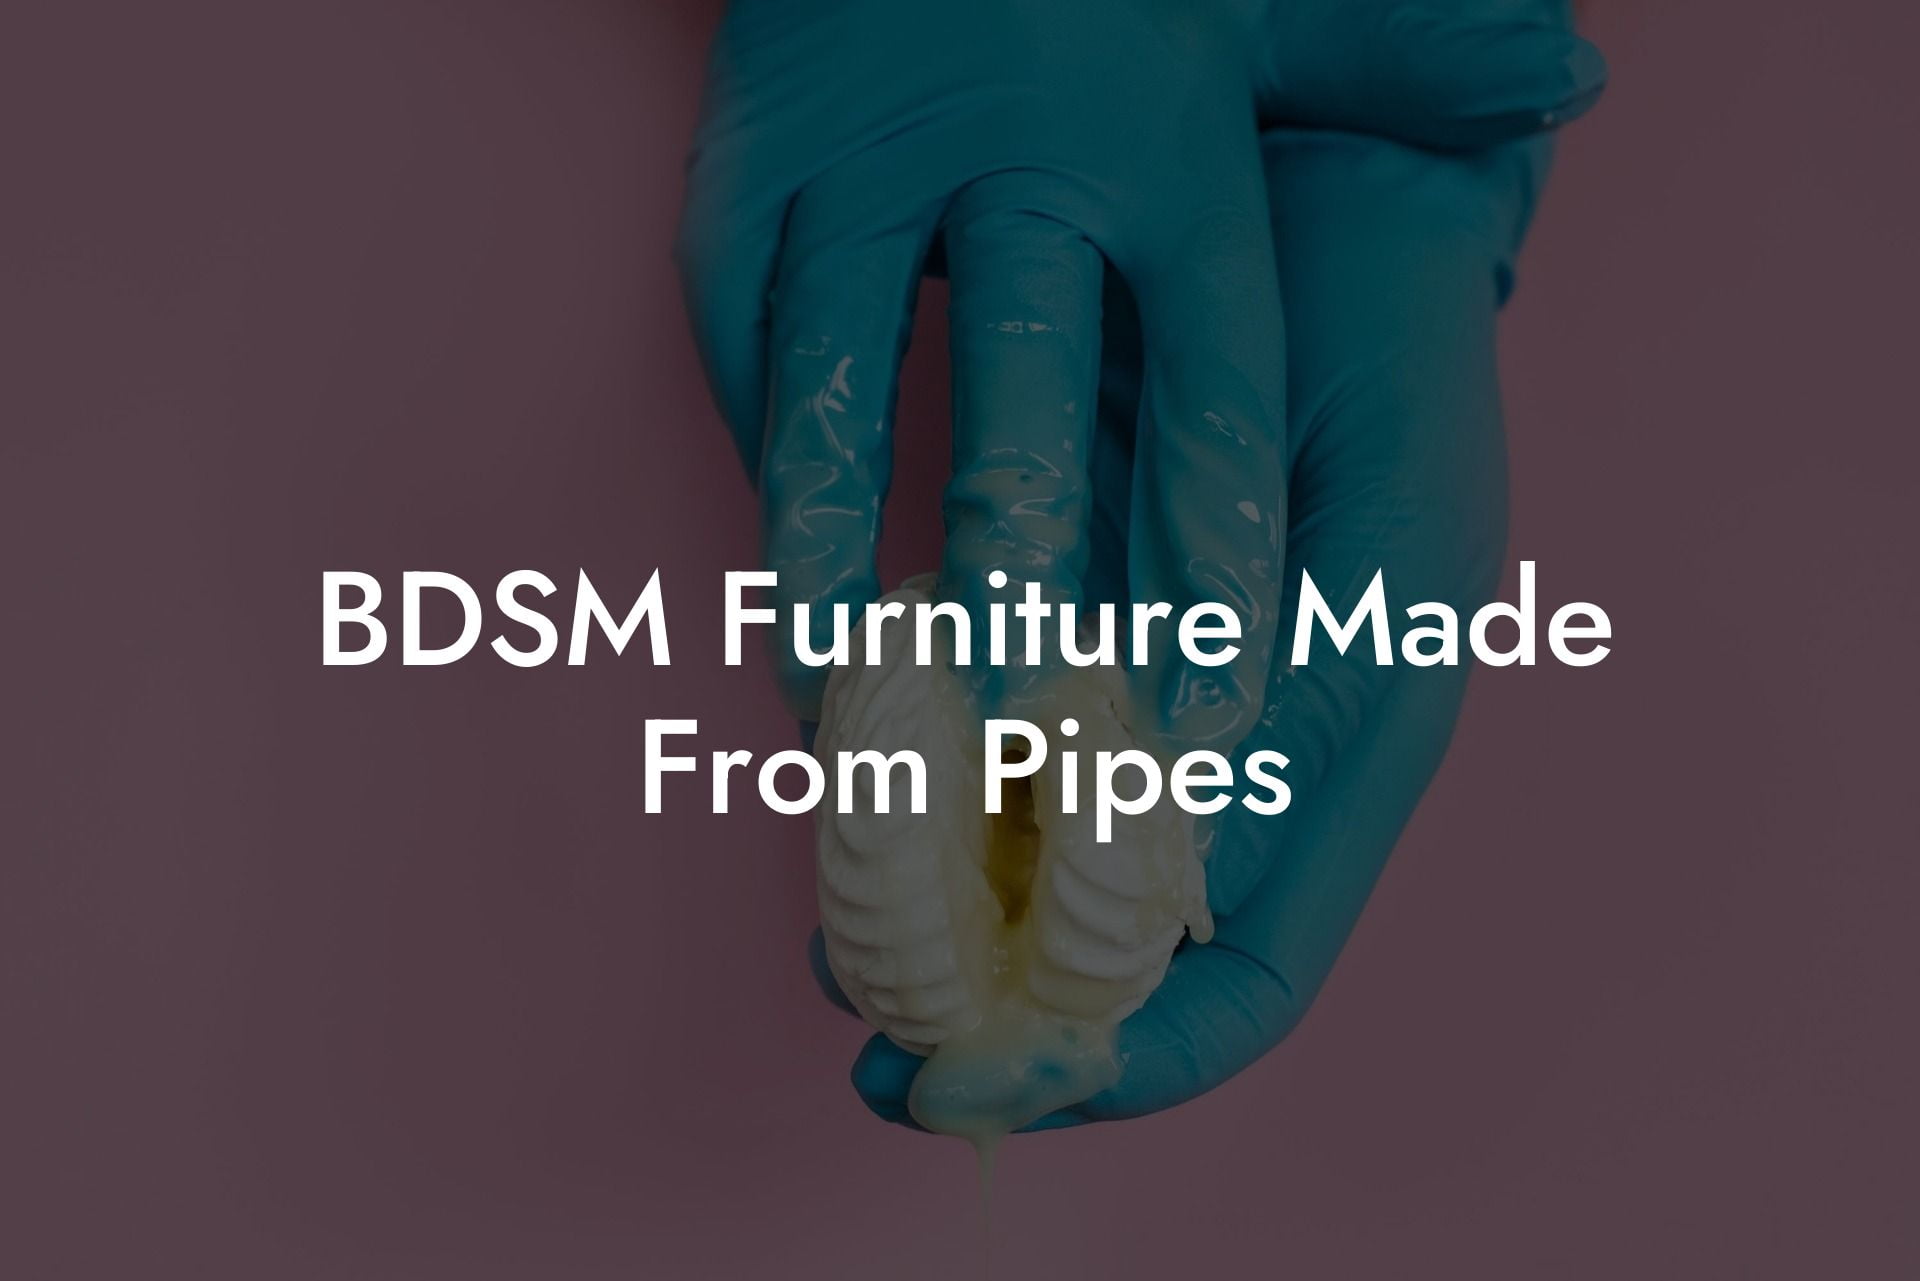 BDSM Furniture Made From Pipes